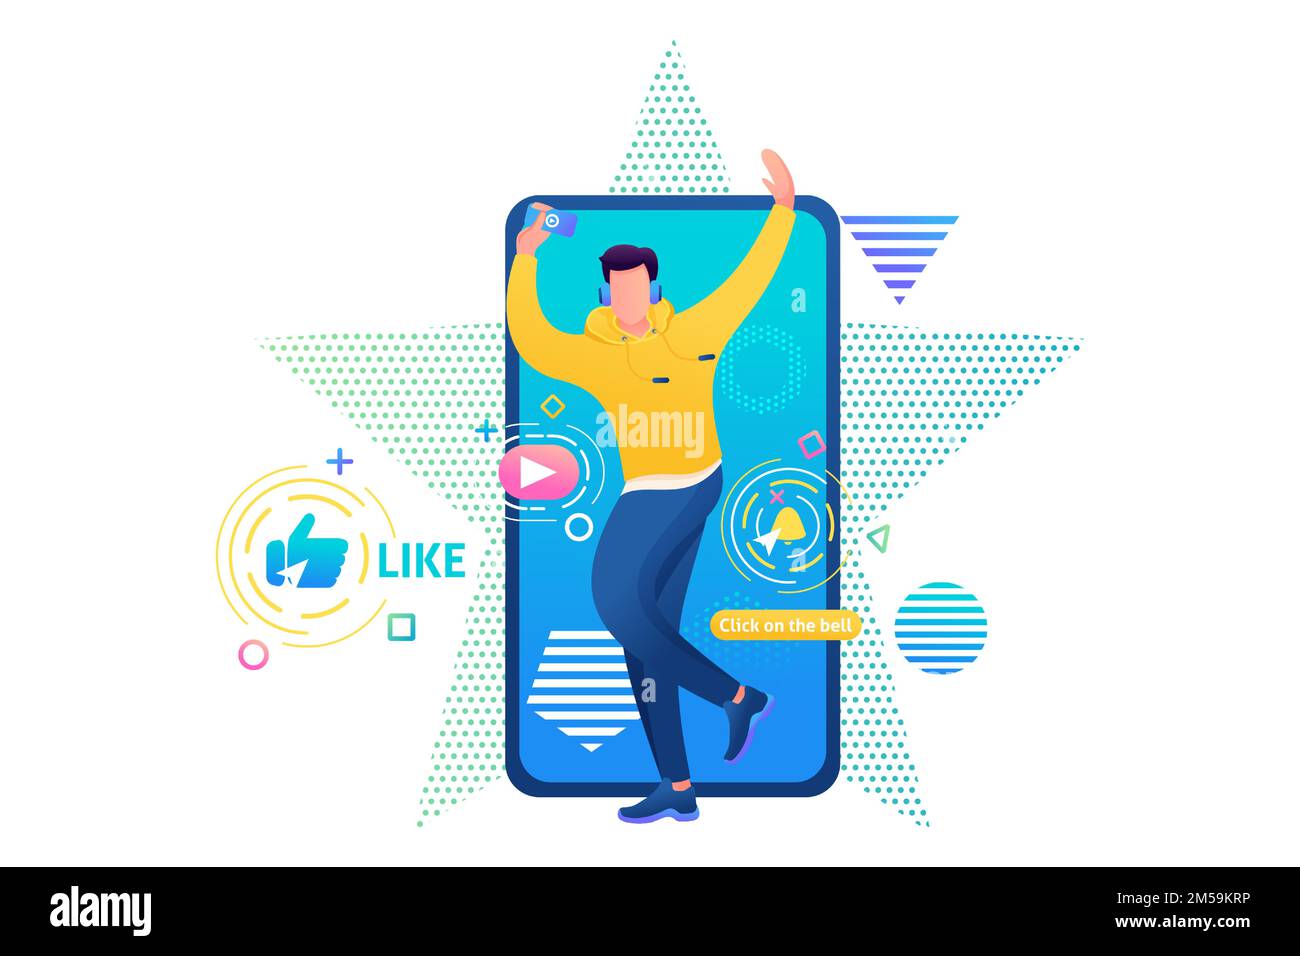 Channel about Young guy, Dance teacher, Tectonics, freestyle, R & B. Web design for dance training. Subscribe to the channel about the dance. Stock Vector